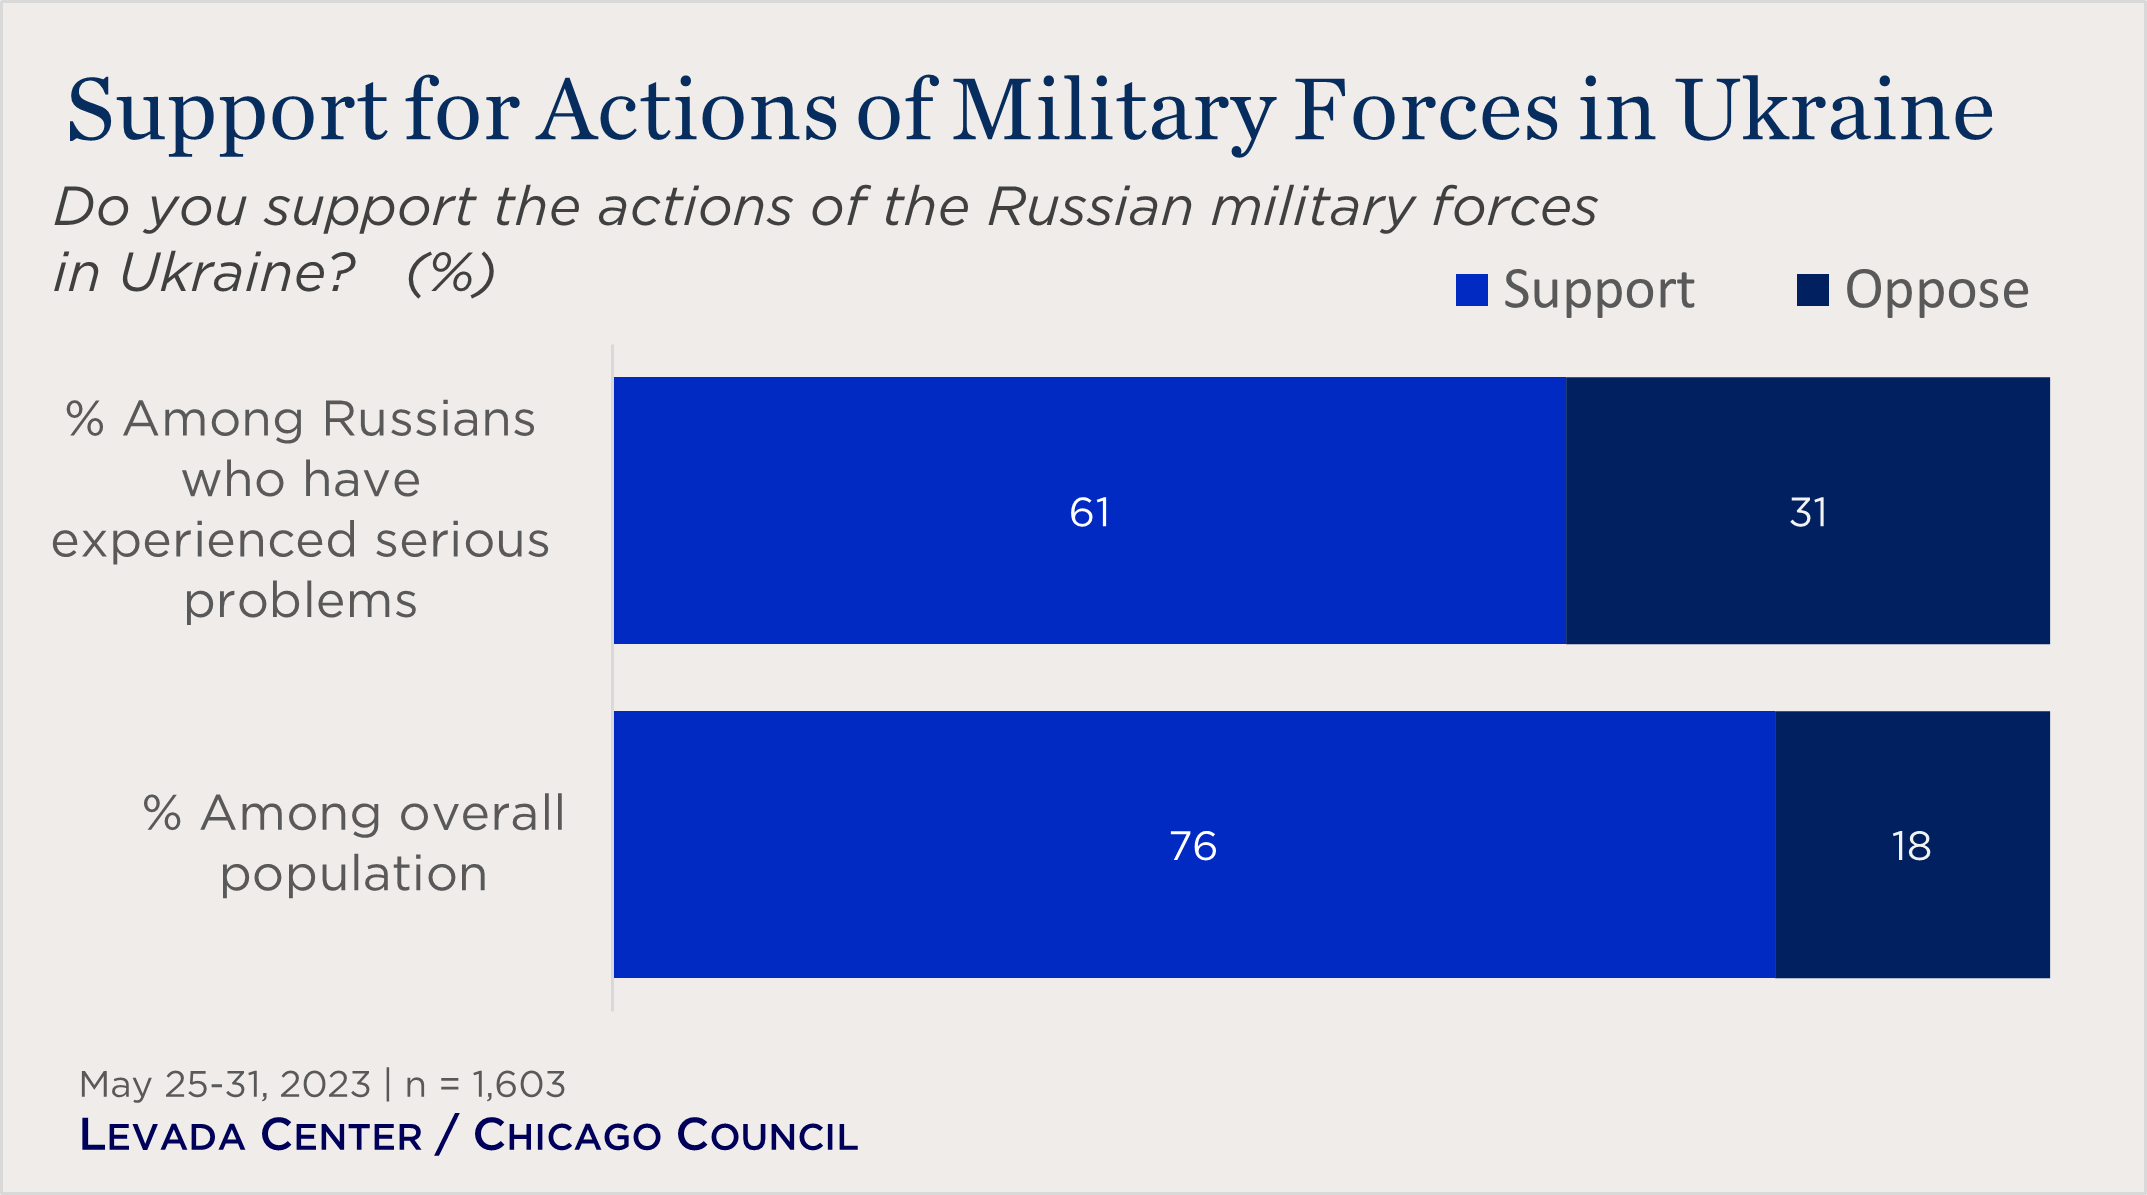 "bar chart showing support for Russian military actions in Ukraine"